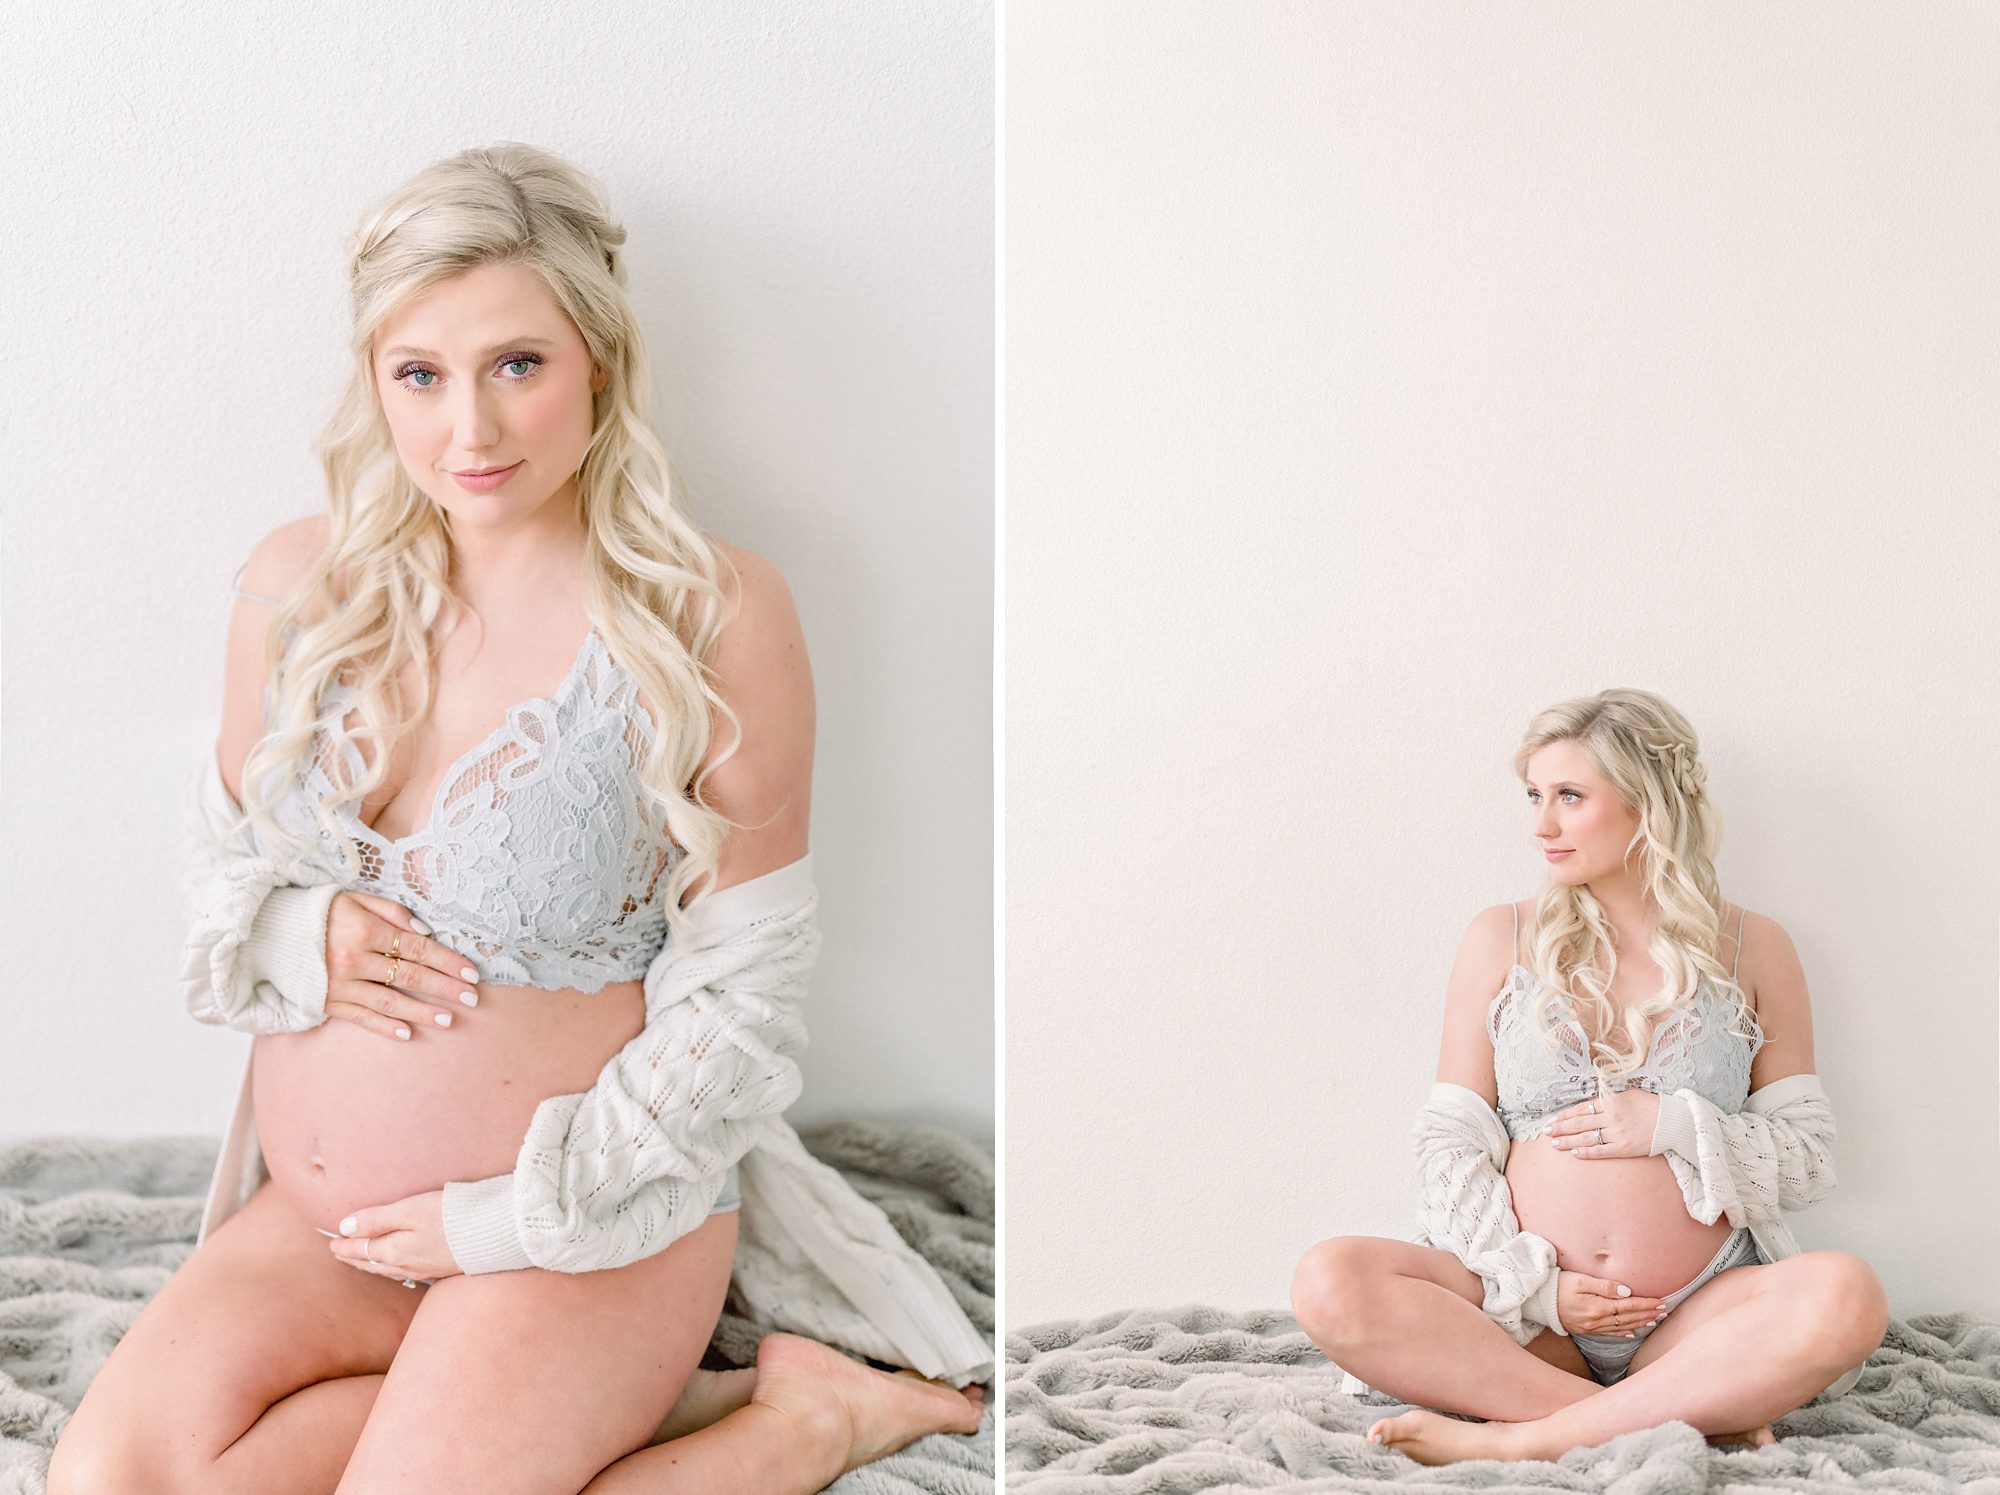 A stunning mom with long blonde hair gets intimate maternity photos done in a bright white studio in Denver. CO.